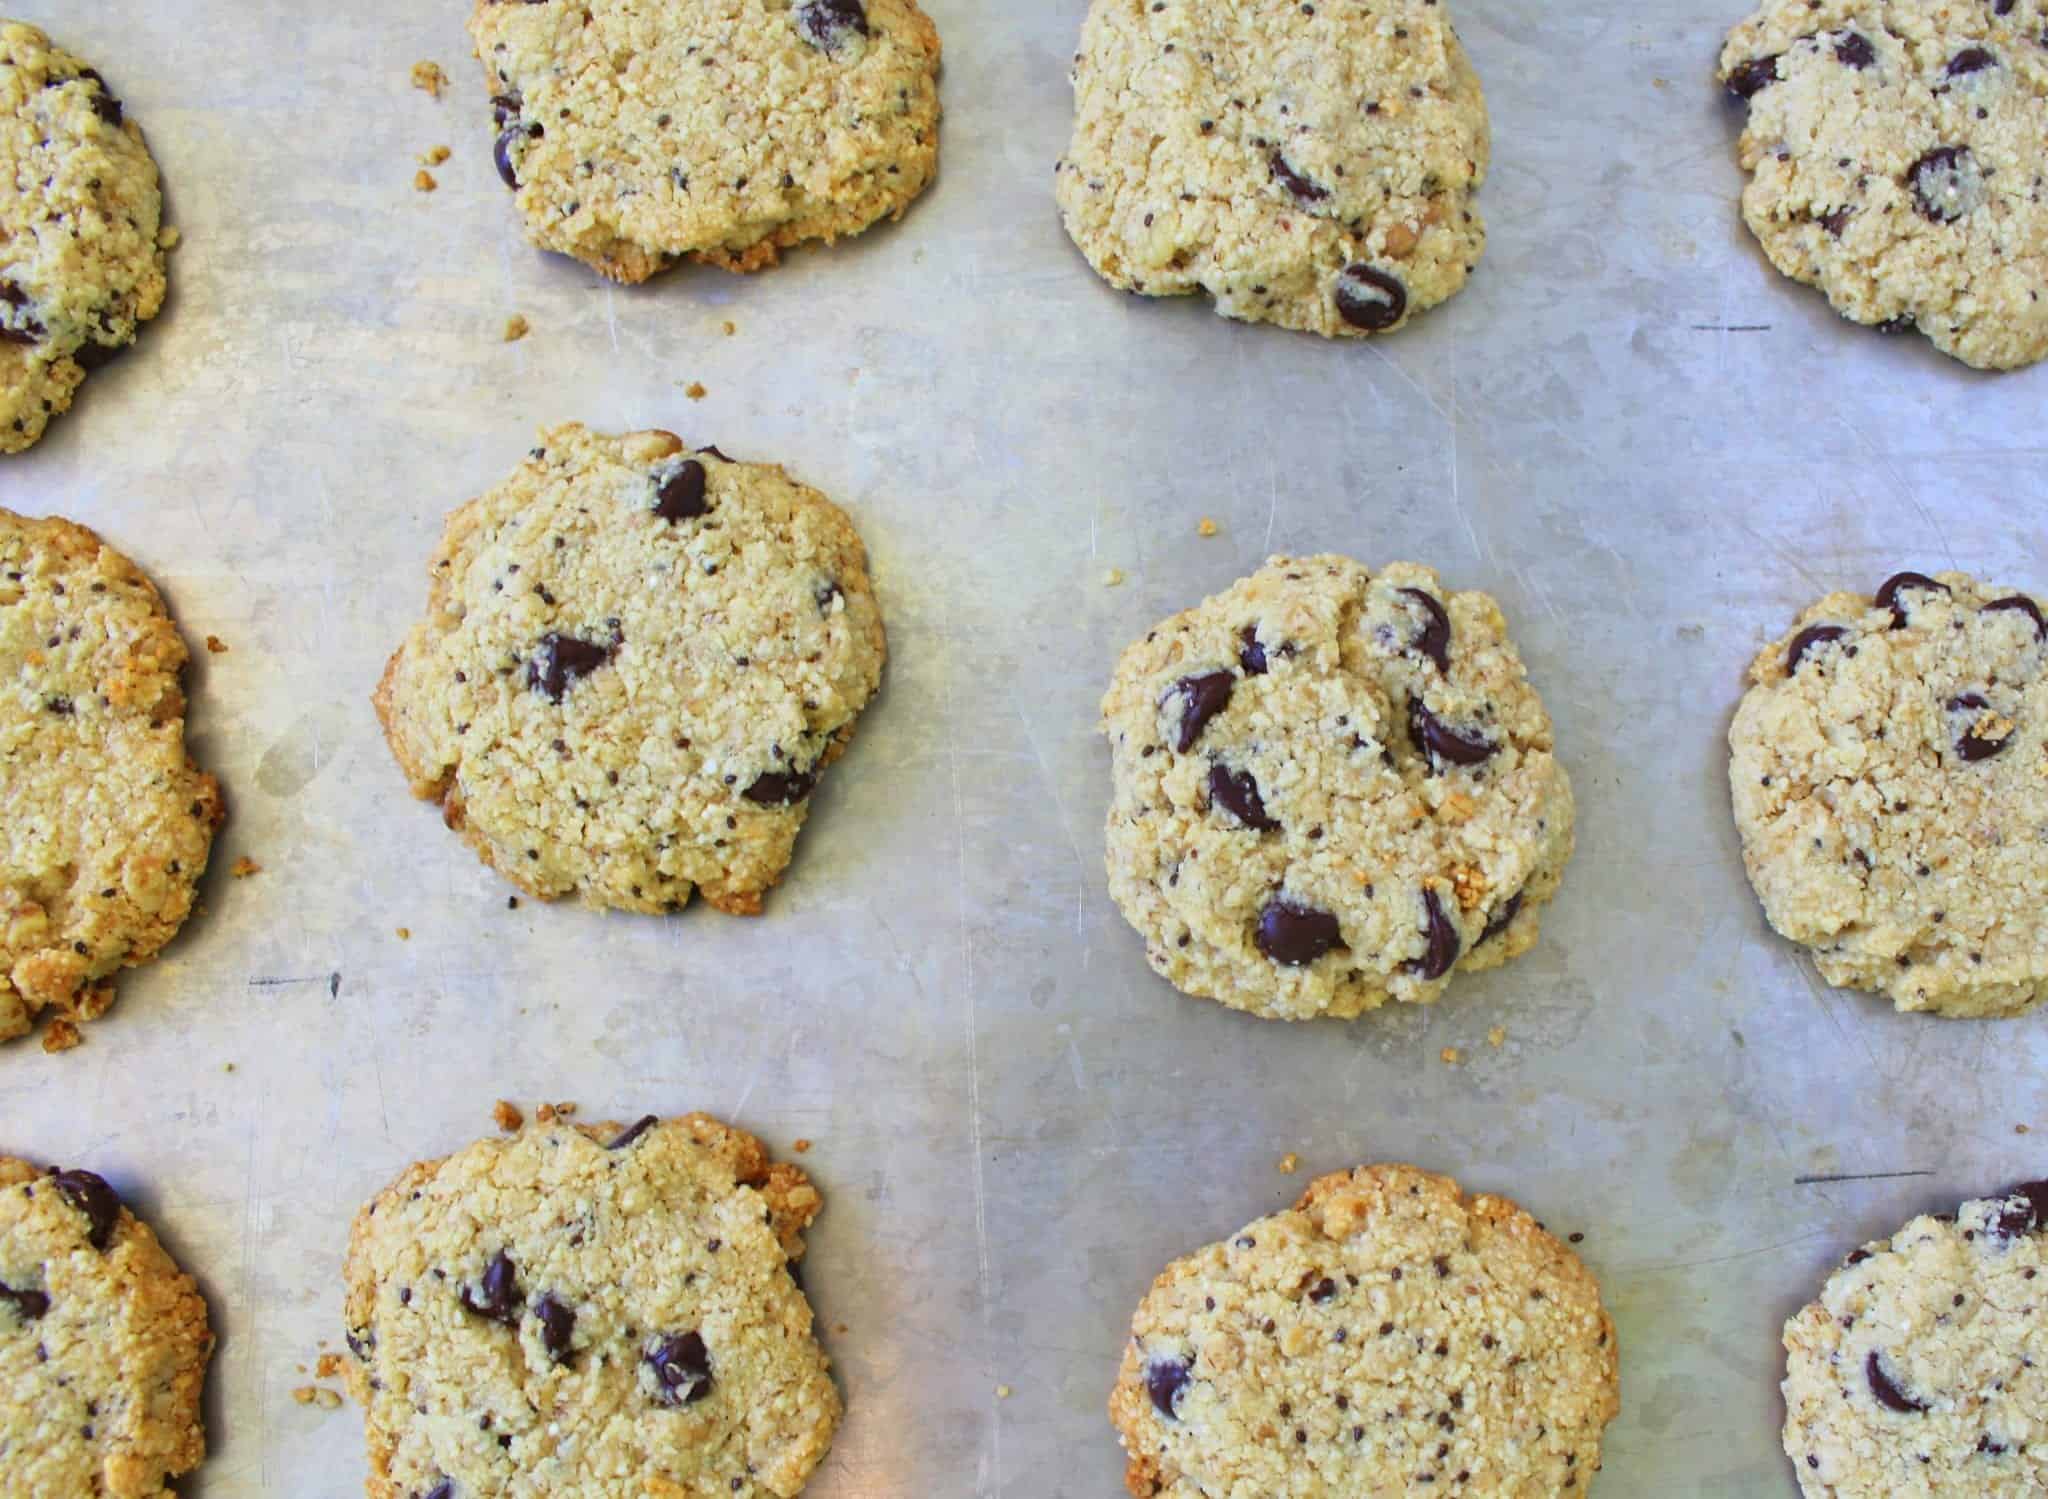 Super Oats Cookies from Treble in the Kitchen